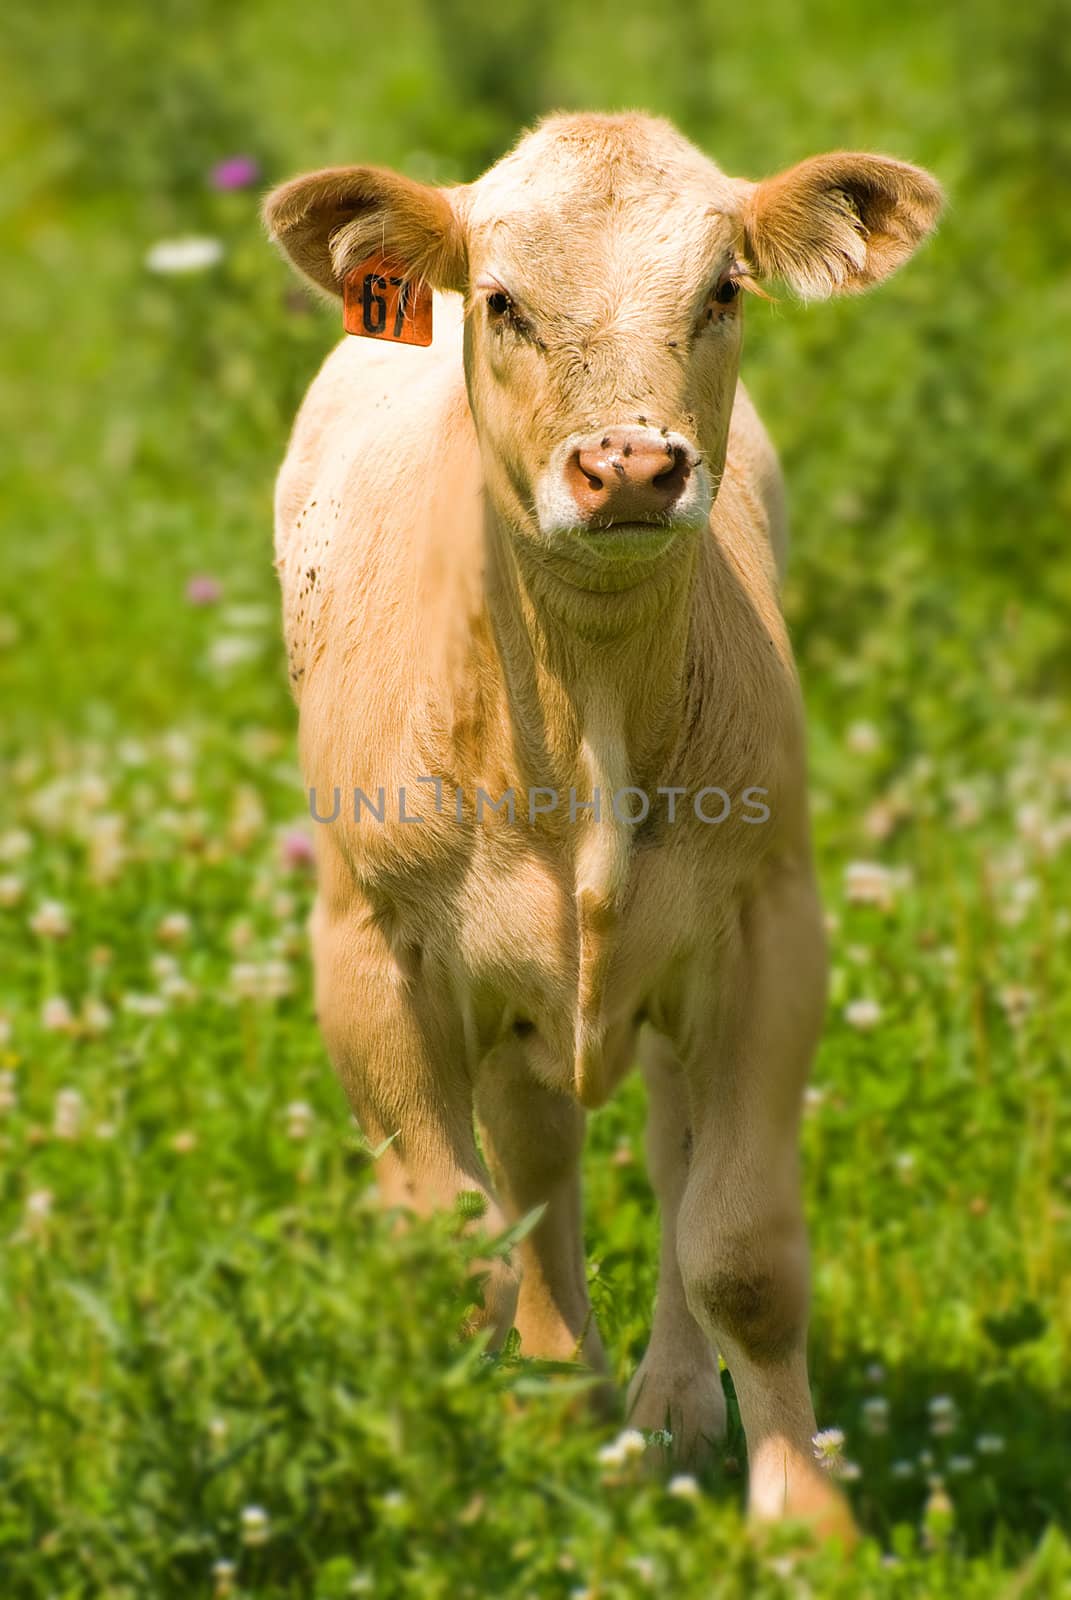 An image of a cow in a field.